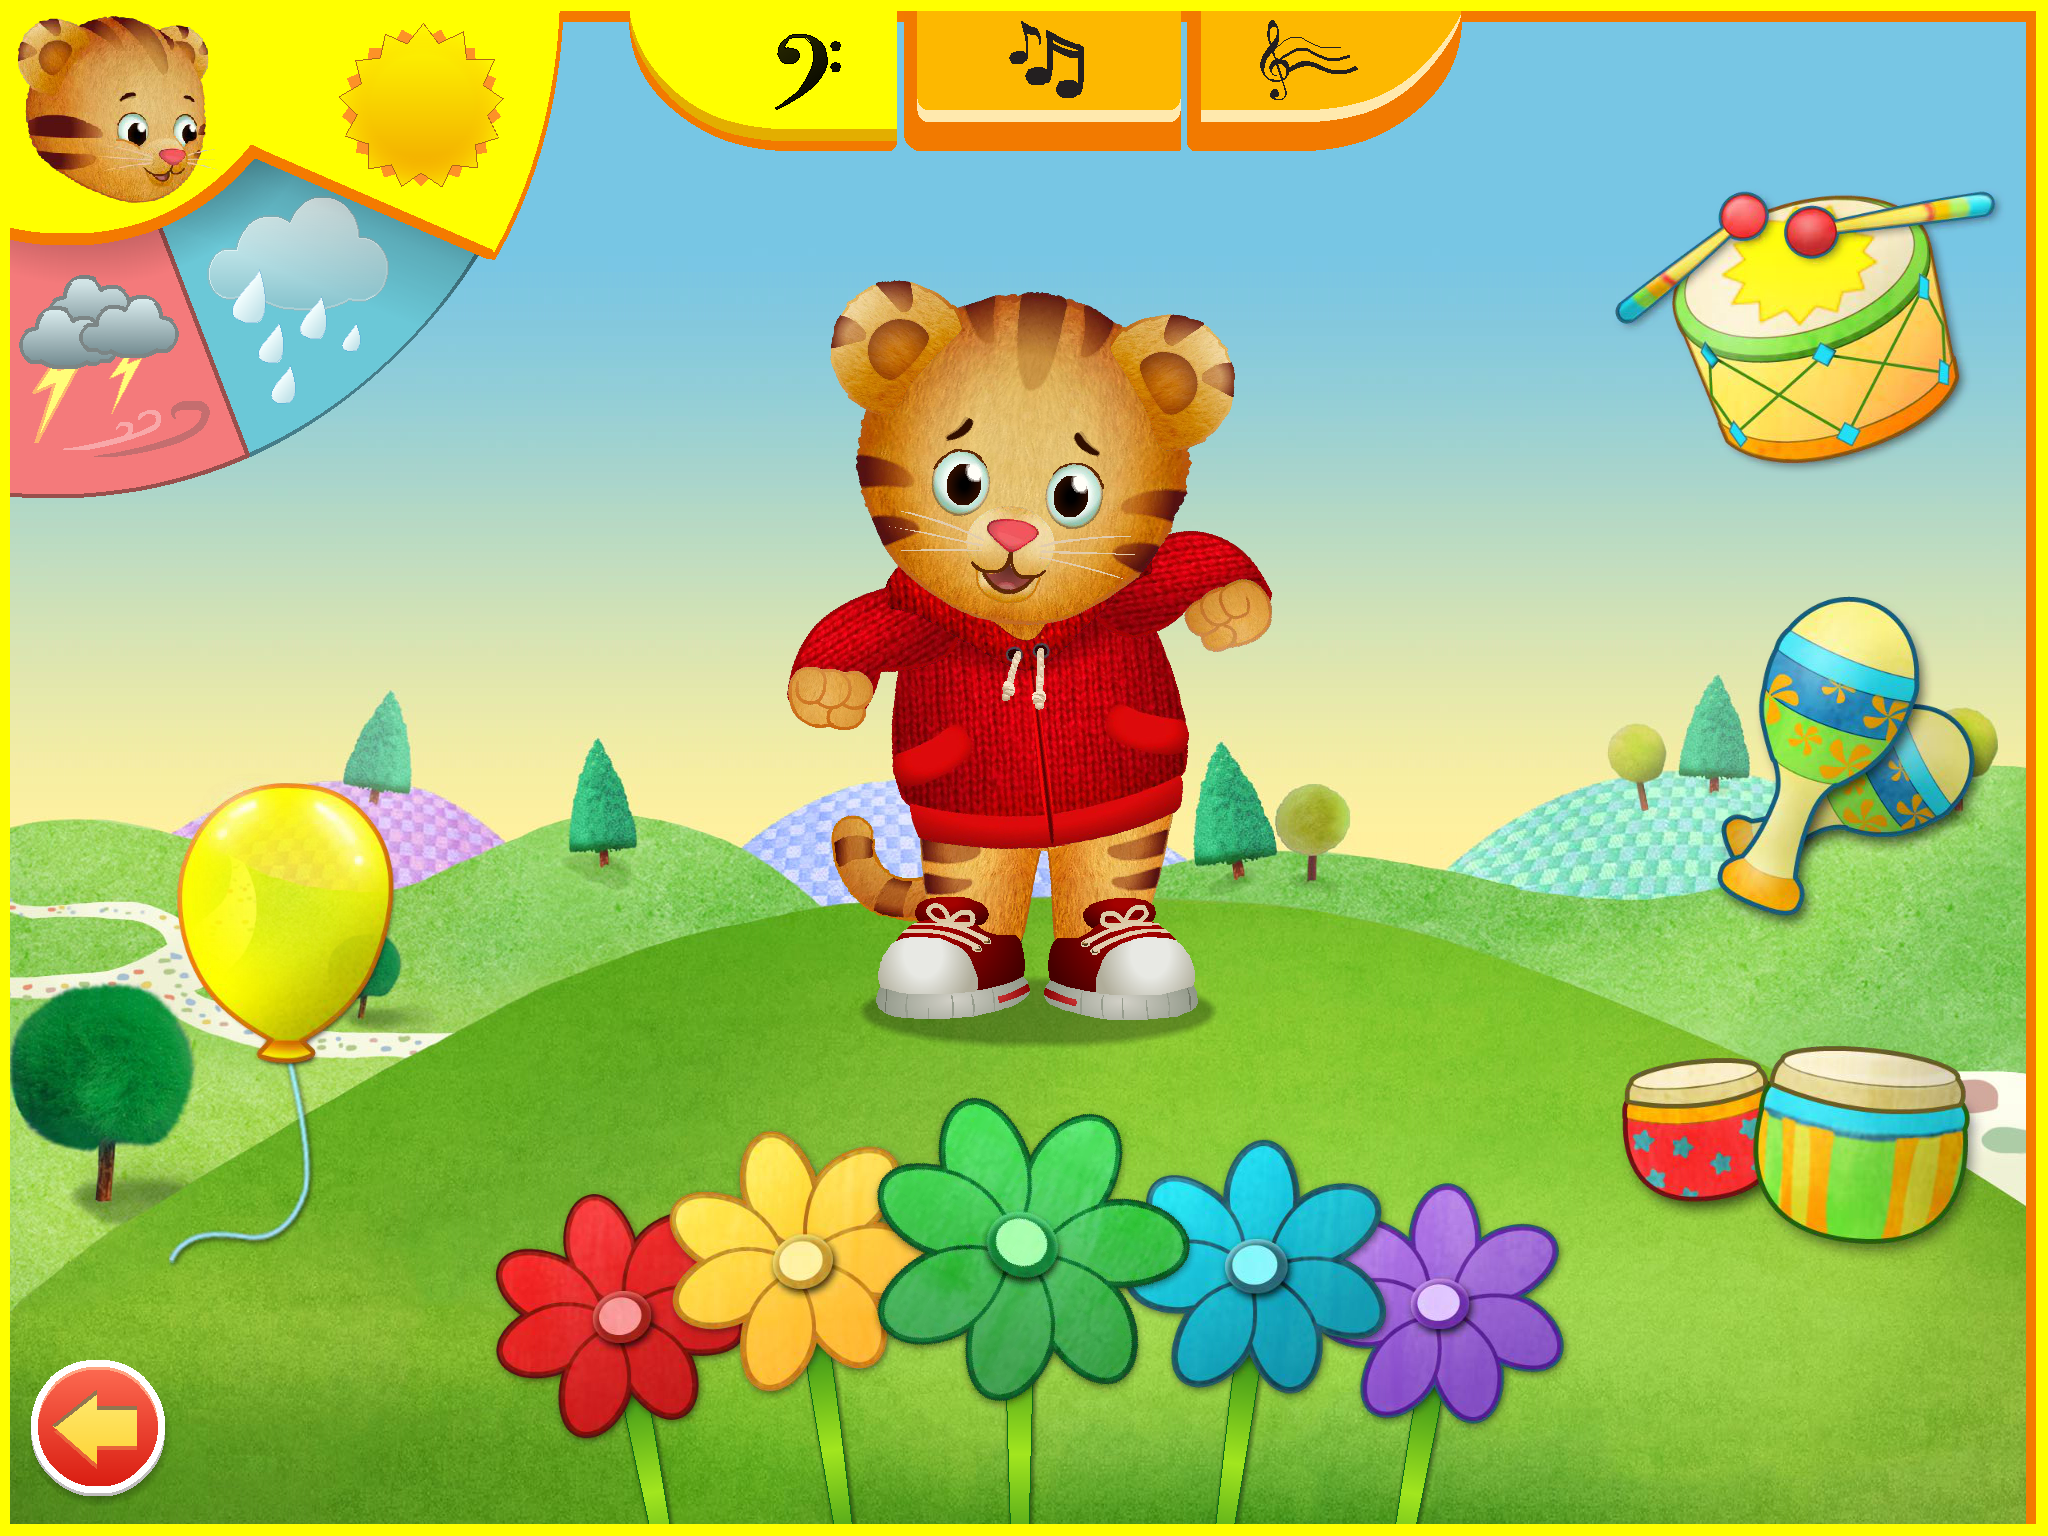 Daniel Tiger's Neighborhood: Play at Home with Daniel Review